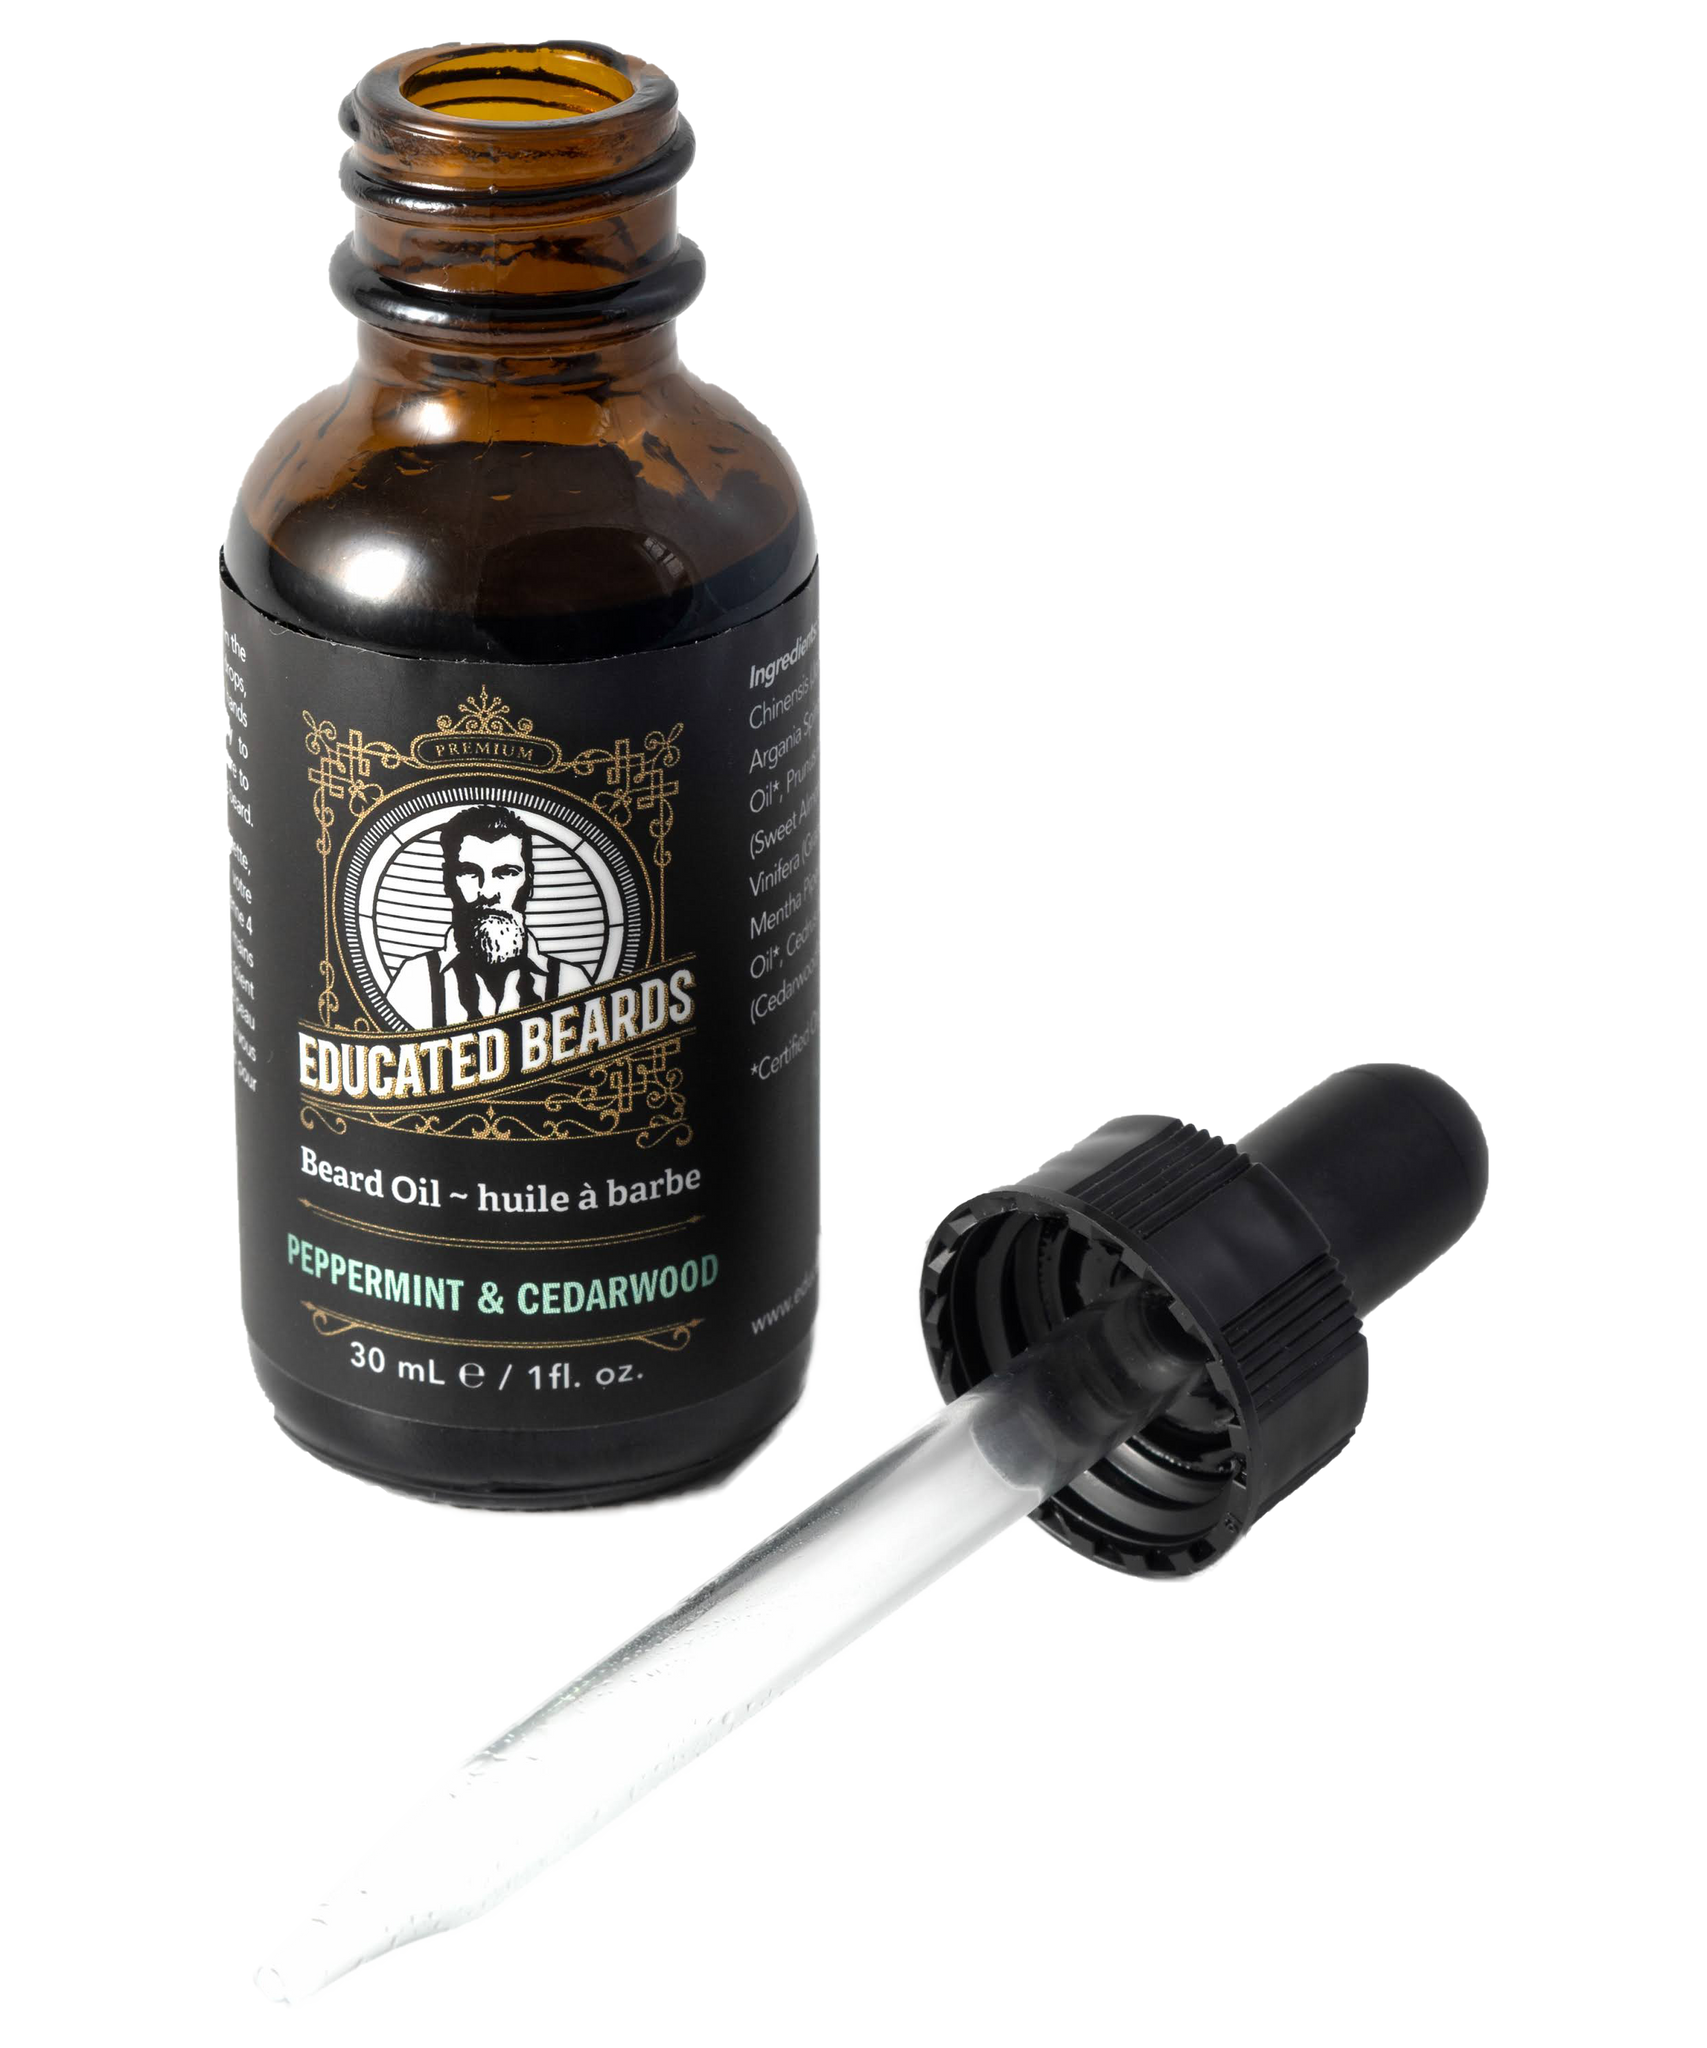 Educated Beards - Peppermint & Cedarwood Beard Oil - all things being eco chilliwack